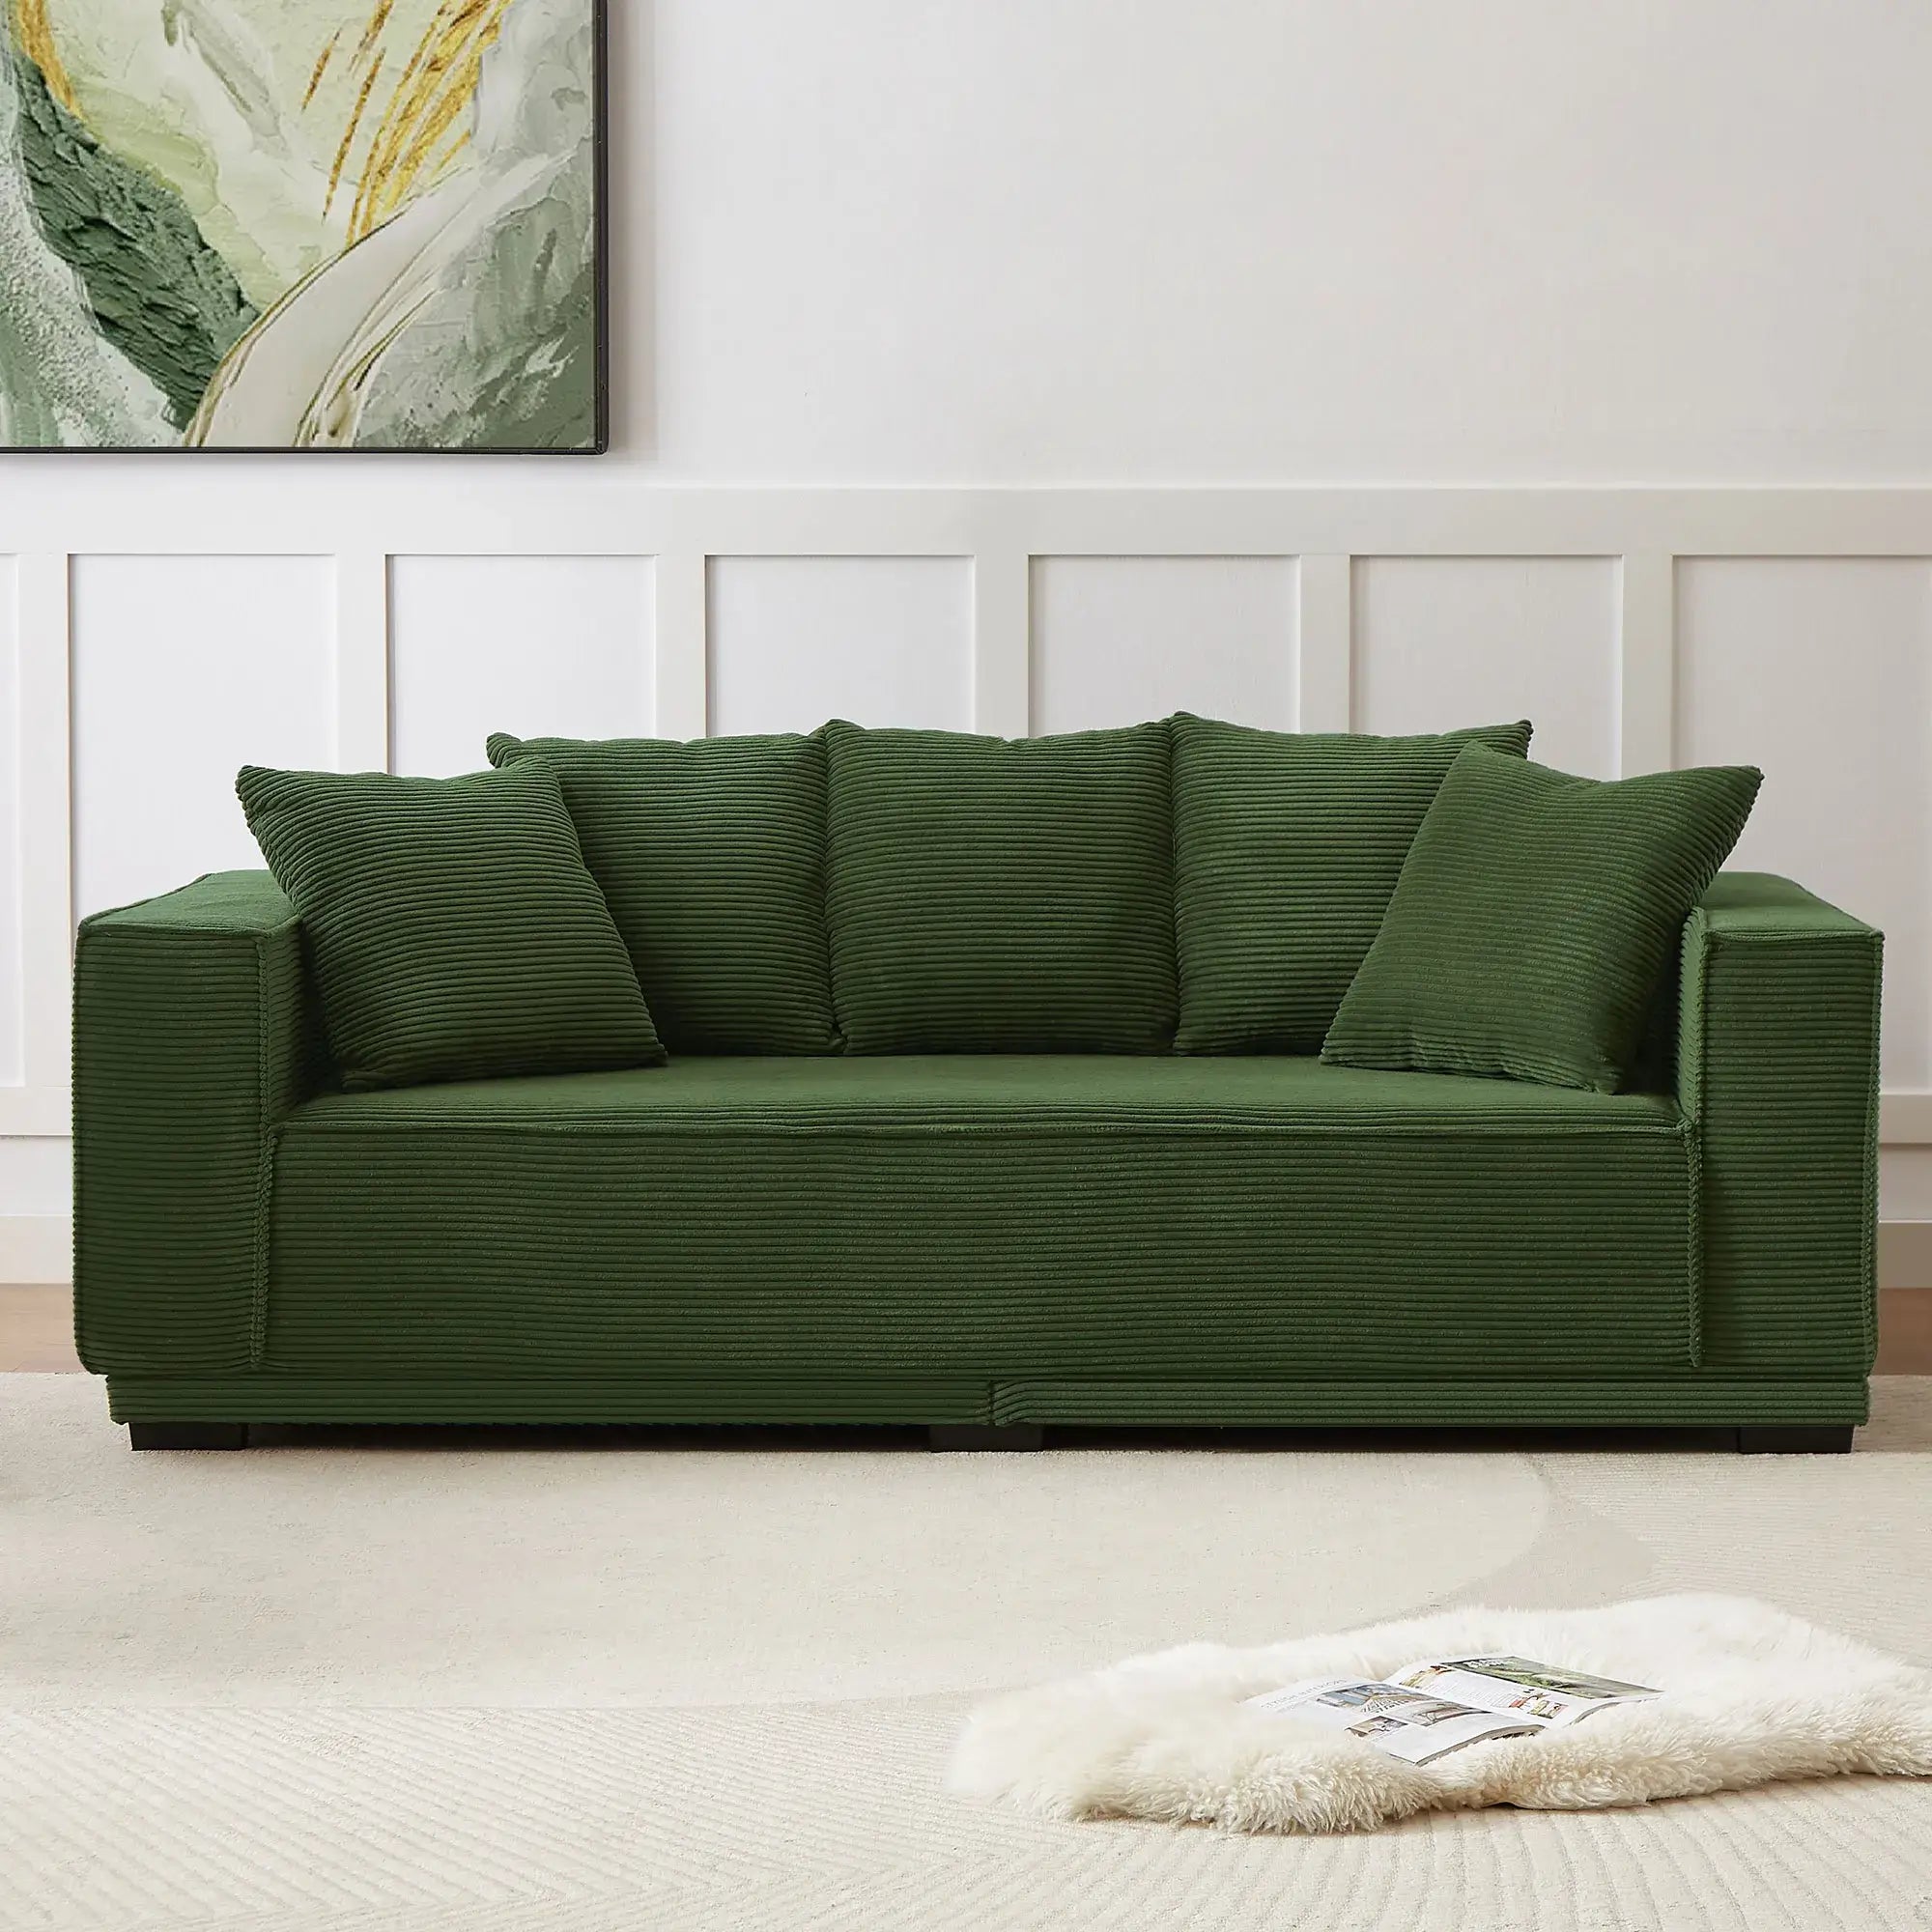 Louie Modern Corduroy Sofa, 3-Seater Couch for Living Room, Bedroom, Apartment in Green